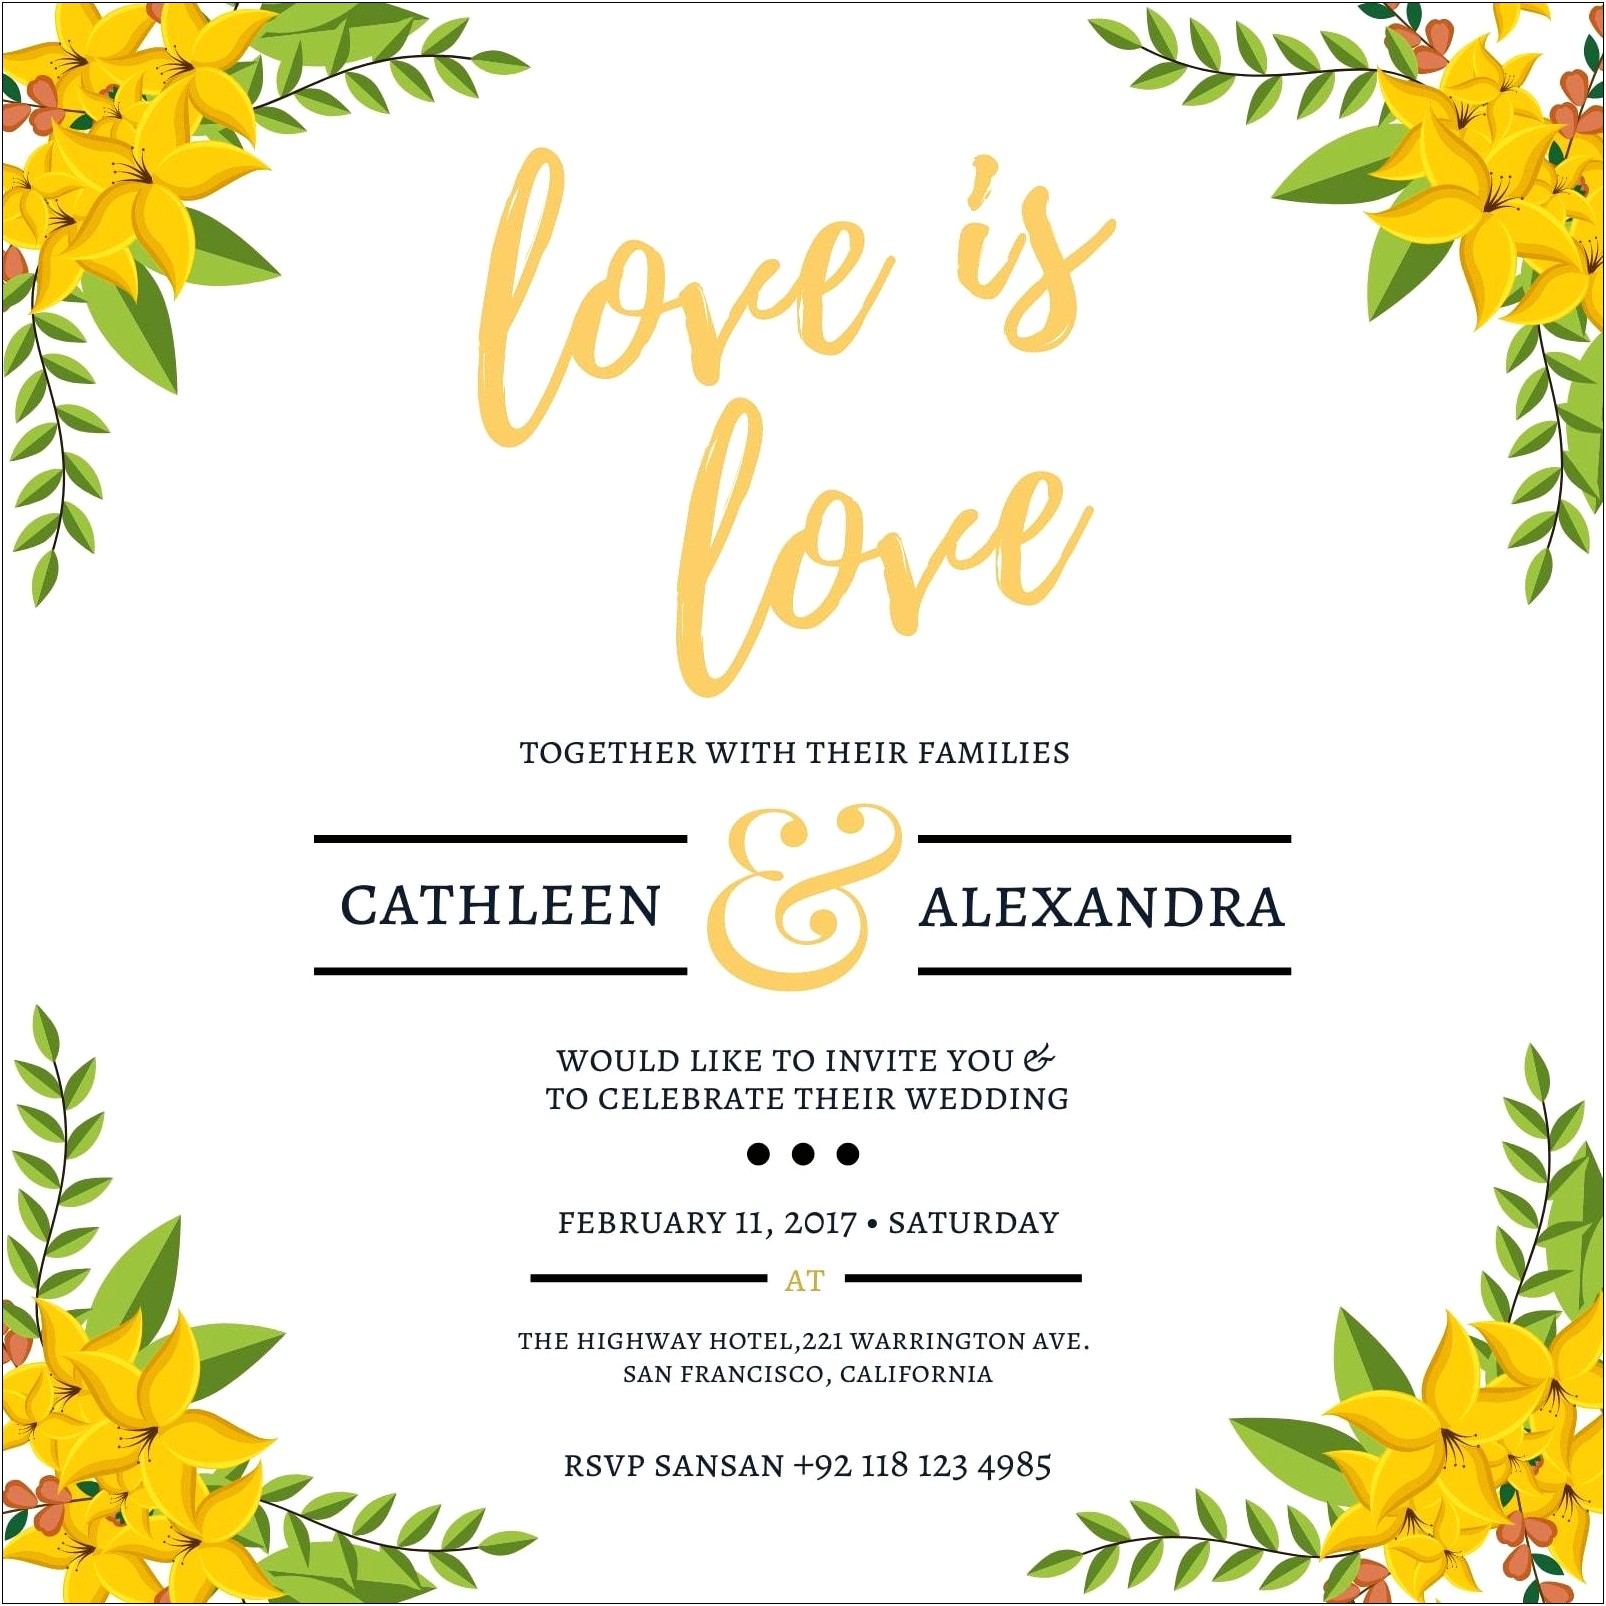 Free Electronic Invitations For An Lgbt Wedding